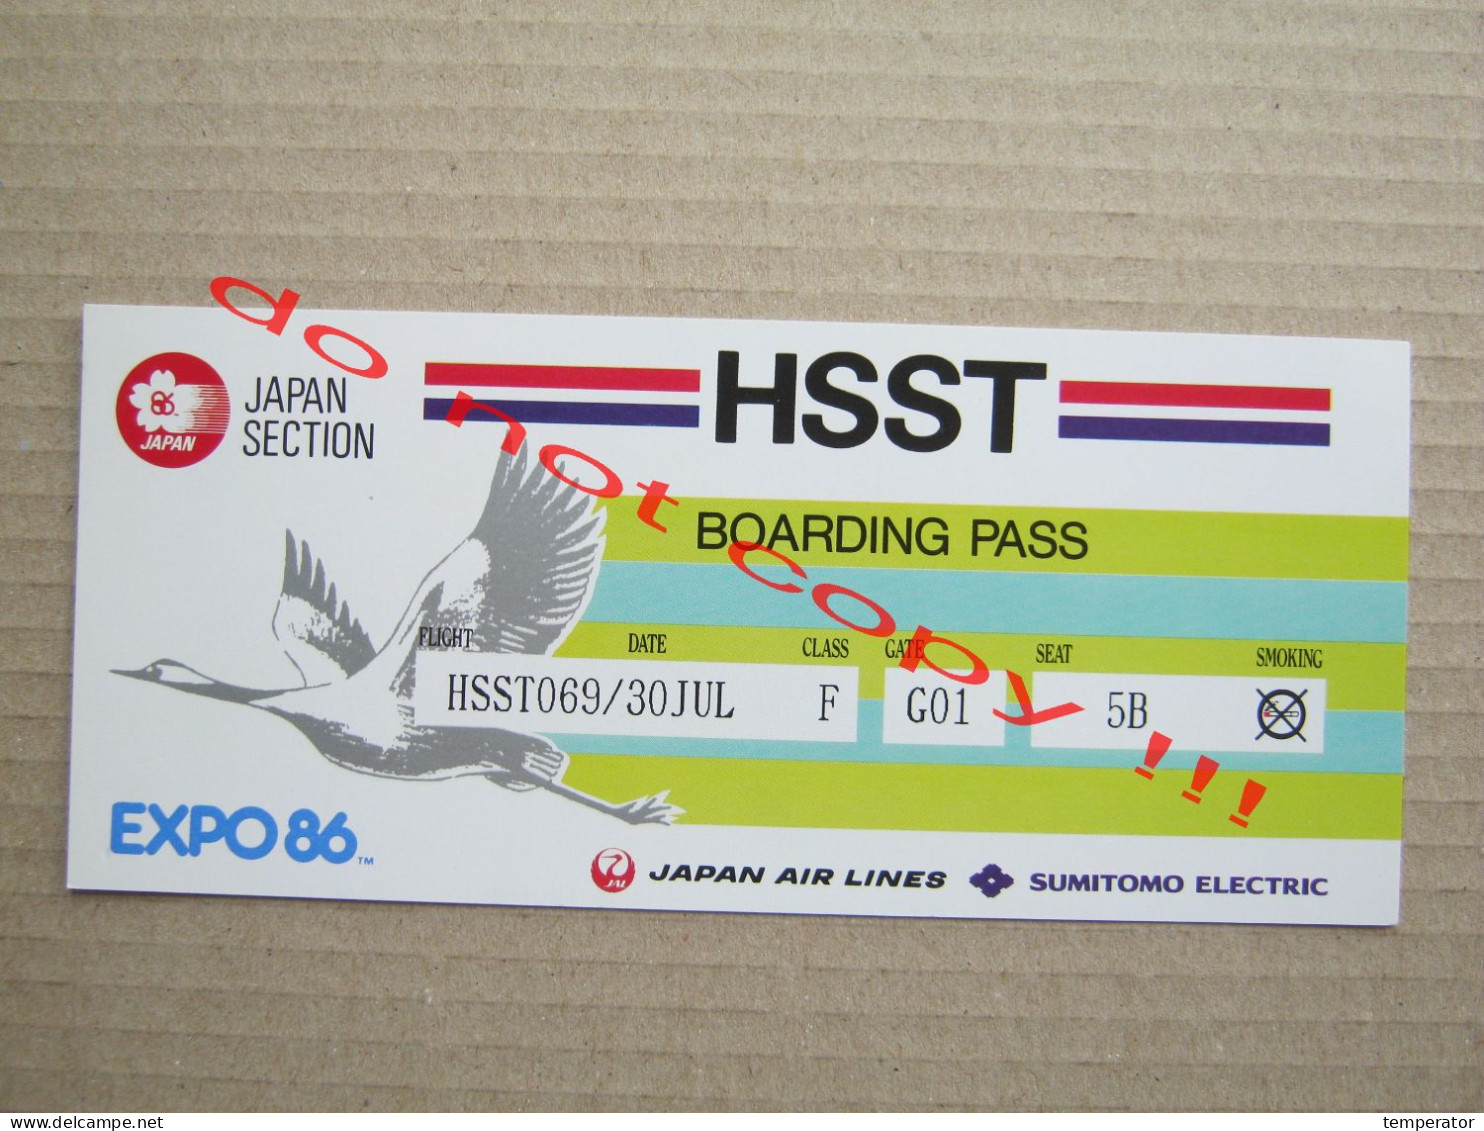 JAPAN AIR LINES 1986 EXPO 86 AIRPLANE BOARDING PASS HSST JAPAN SECTION ( 3 ) - Boarding Passes